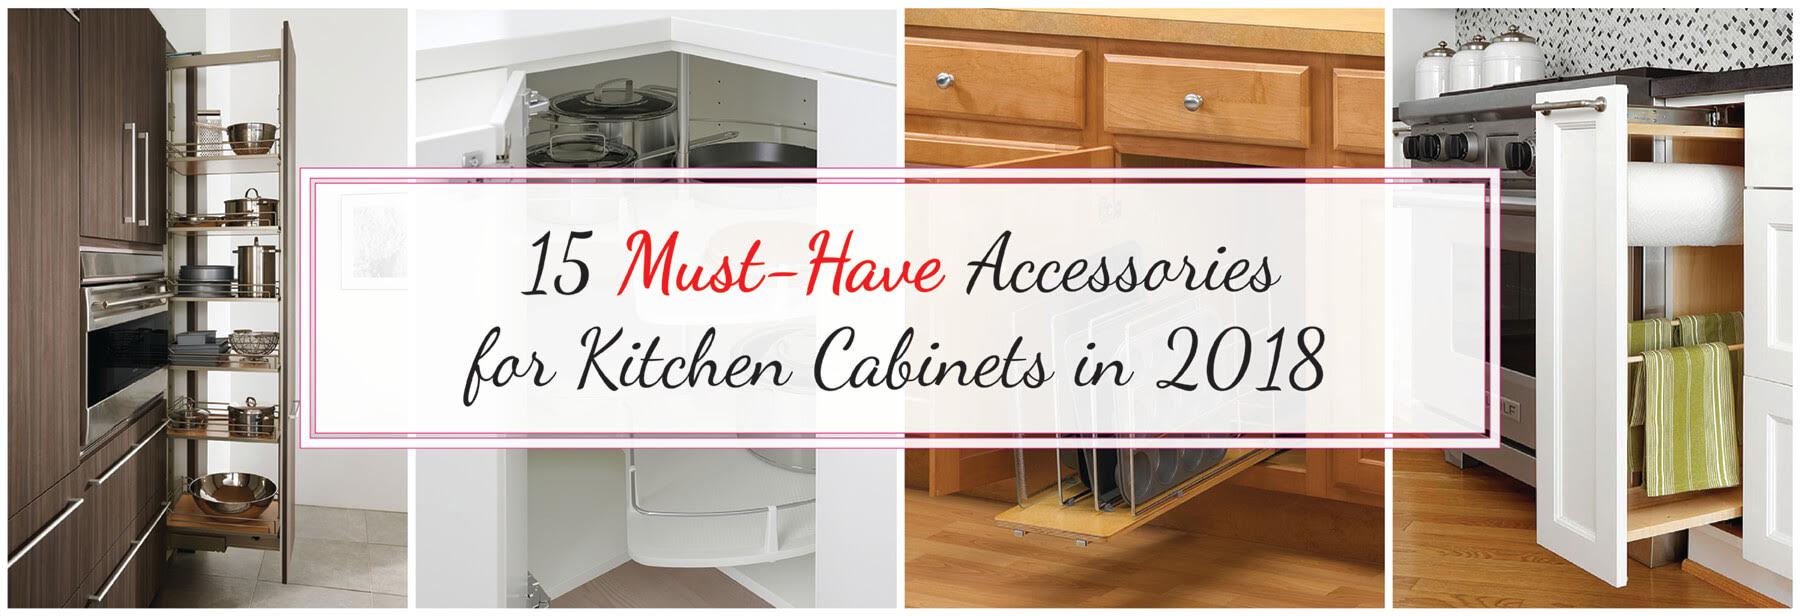 https://www.bestonlinecabinets.com/blog/wp-content/uploads/2018/07/15-must-have-accessories-for-kitchen-cabinets-in-2018.jpg